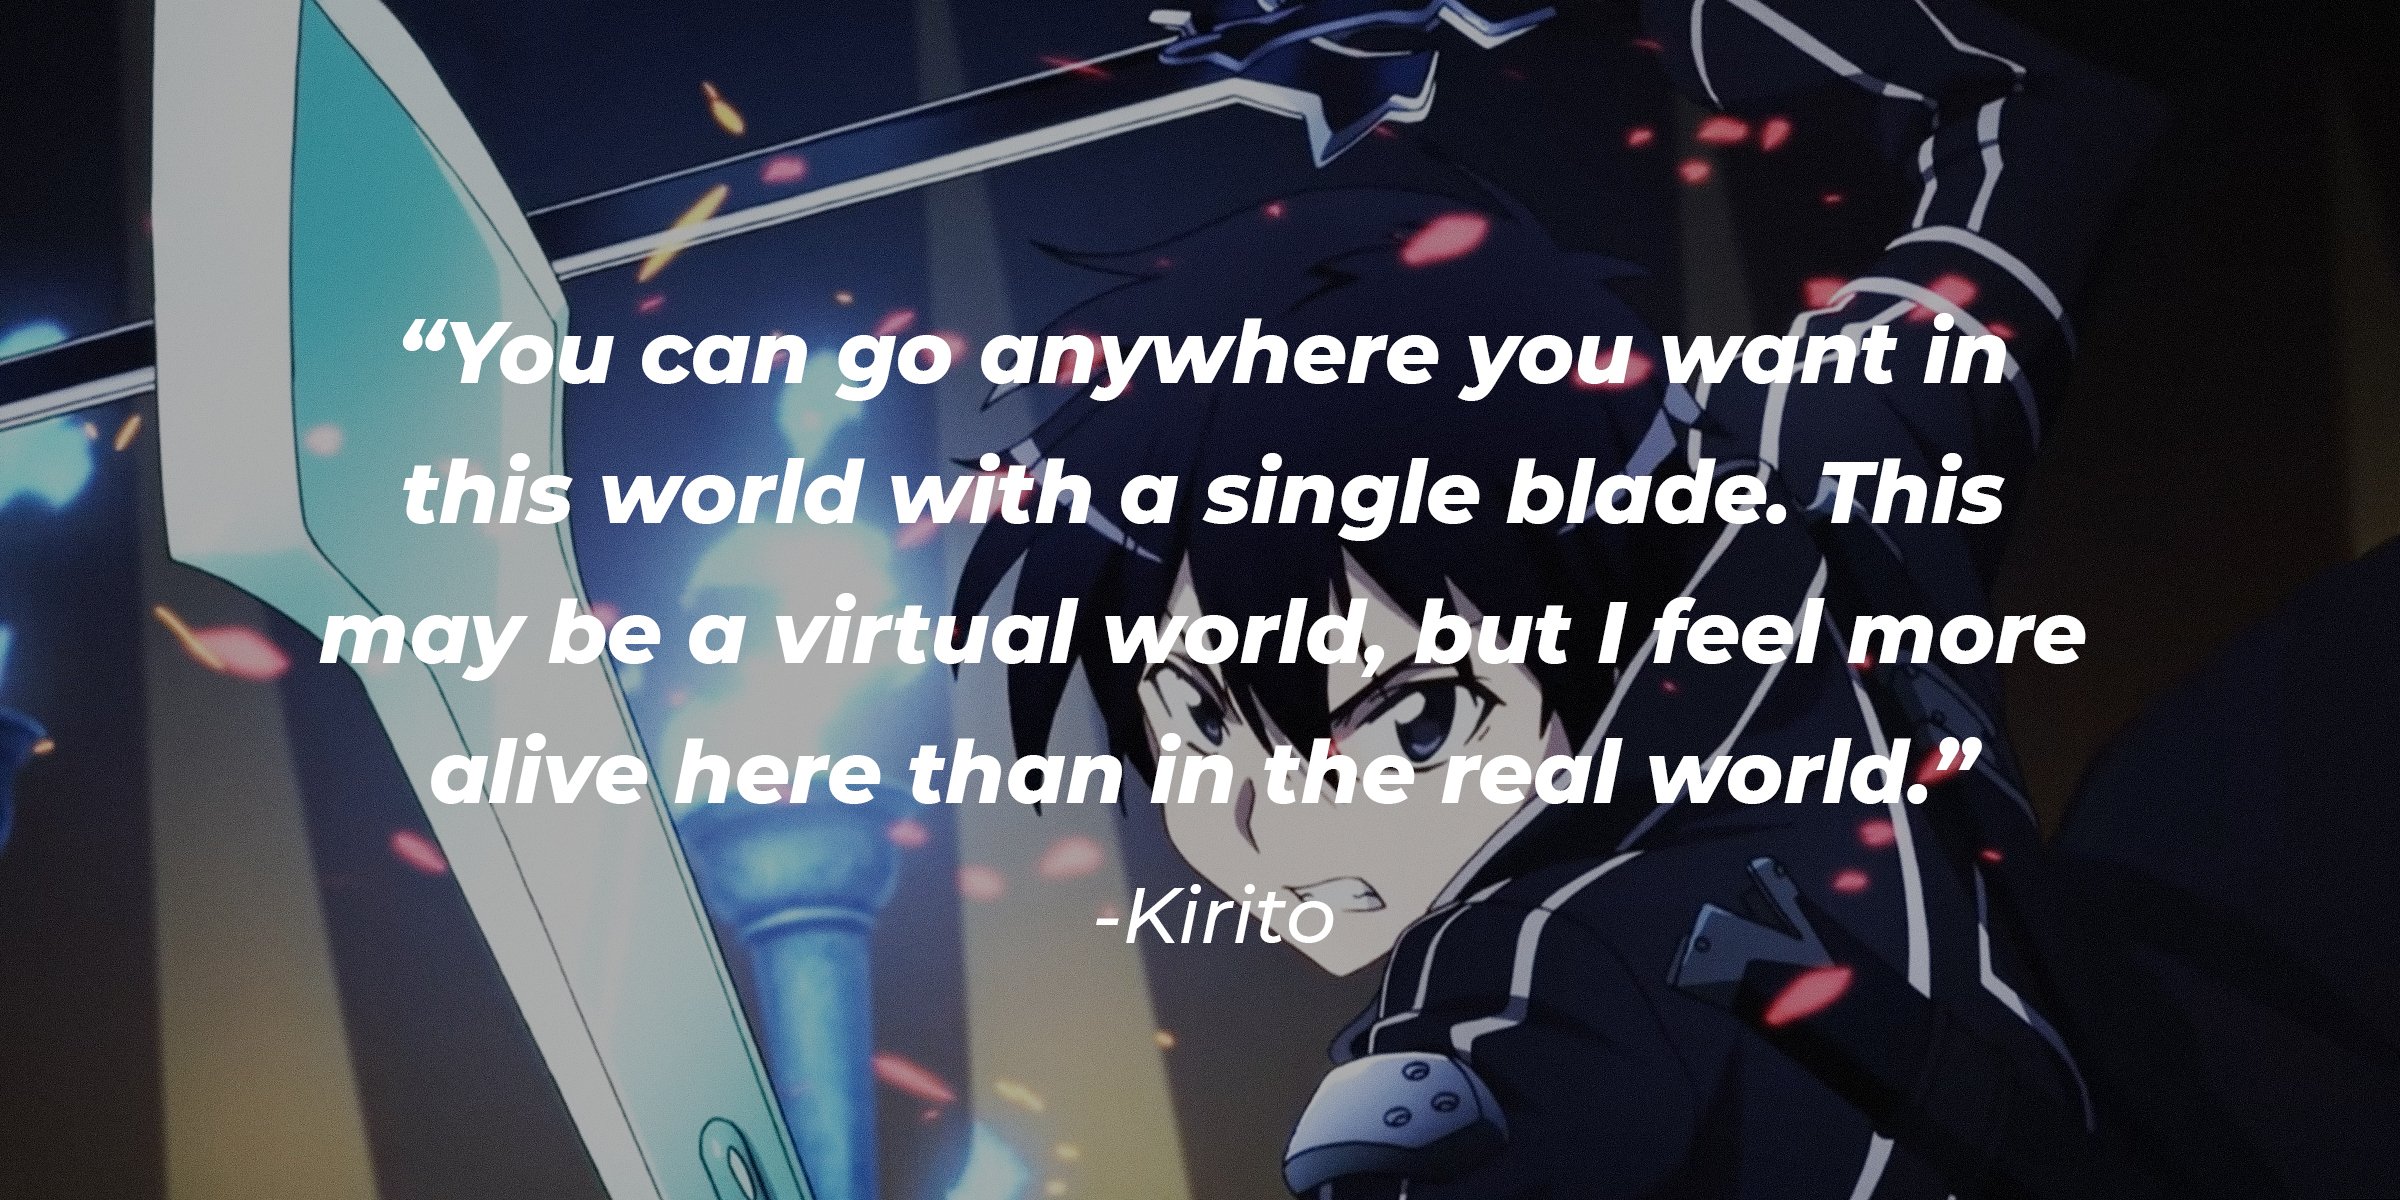 youtube.com/Netflix Japan | A picture of the animated character Kirito with a quote by him, which reads, "You can go anywhere you want in this world with a single blade. This may be a virtual world, but I feel more alive here than then the real world."